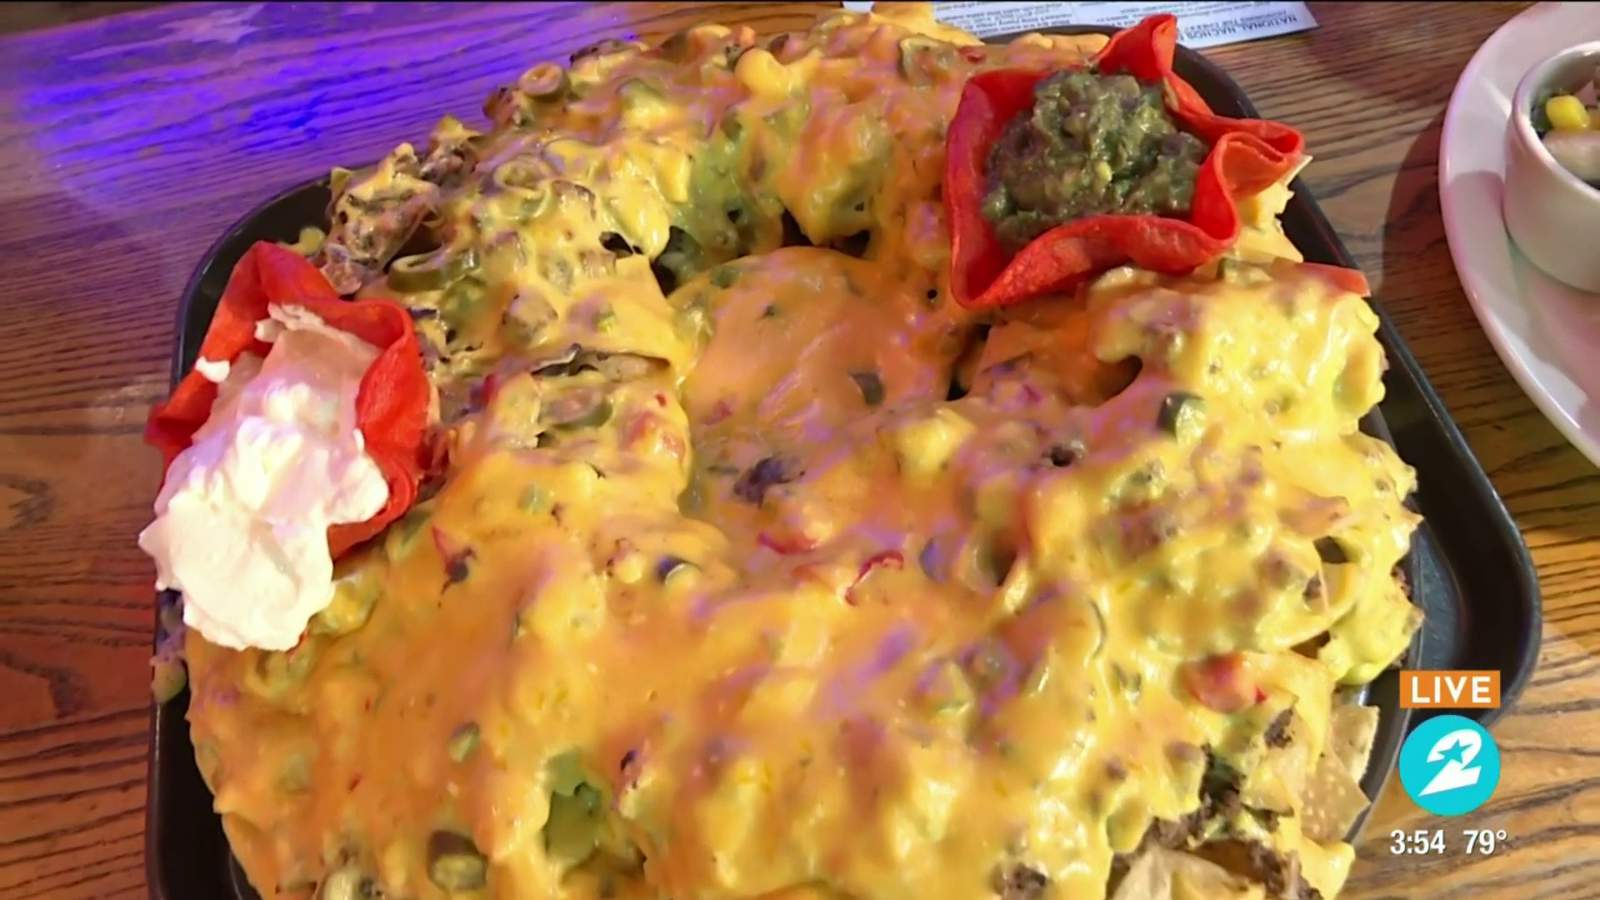 Na-cho average dish! Celebrating ‘National Nachos Day’ in H-Town with some cheesy goodness